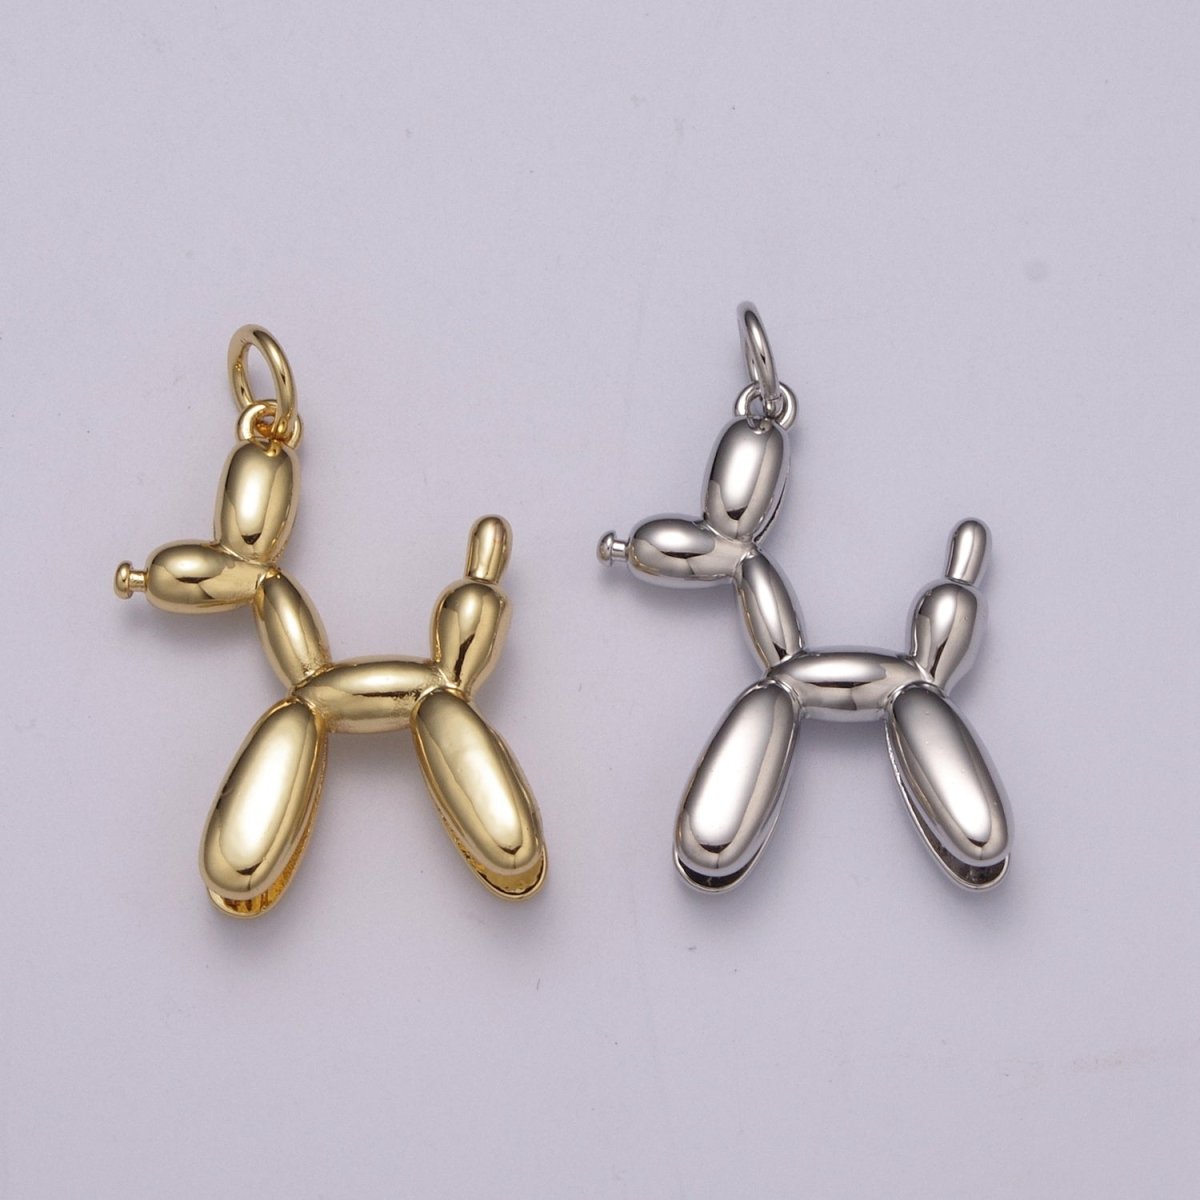 Dainty Balloon Dog Charm - 14K Gold Filled puppy pendant, fun whimsical 3D pet animal lover, poodle Pendant M-862 M-863 - DLUXCA